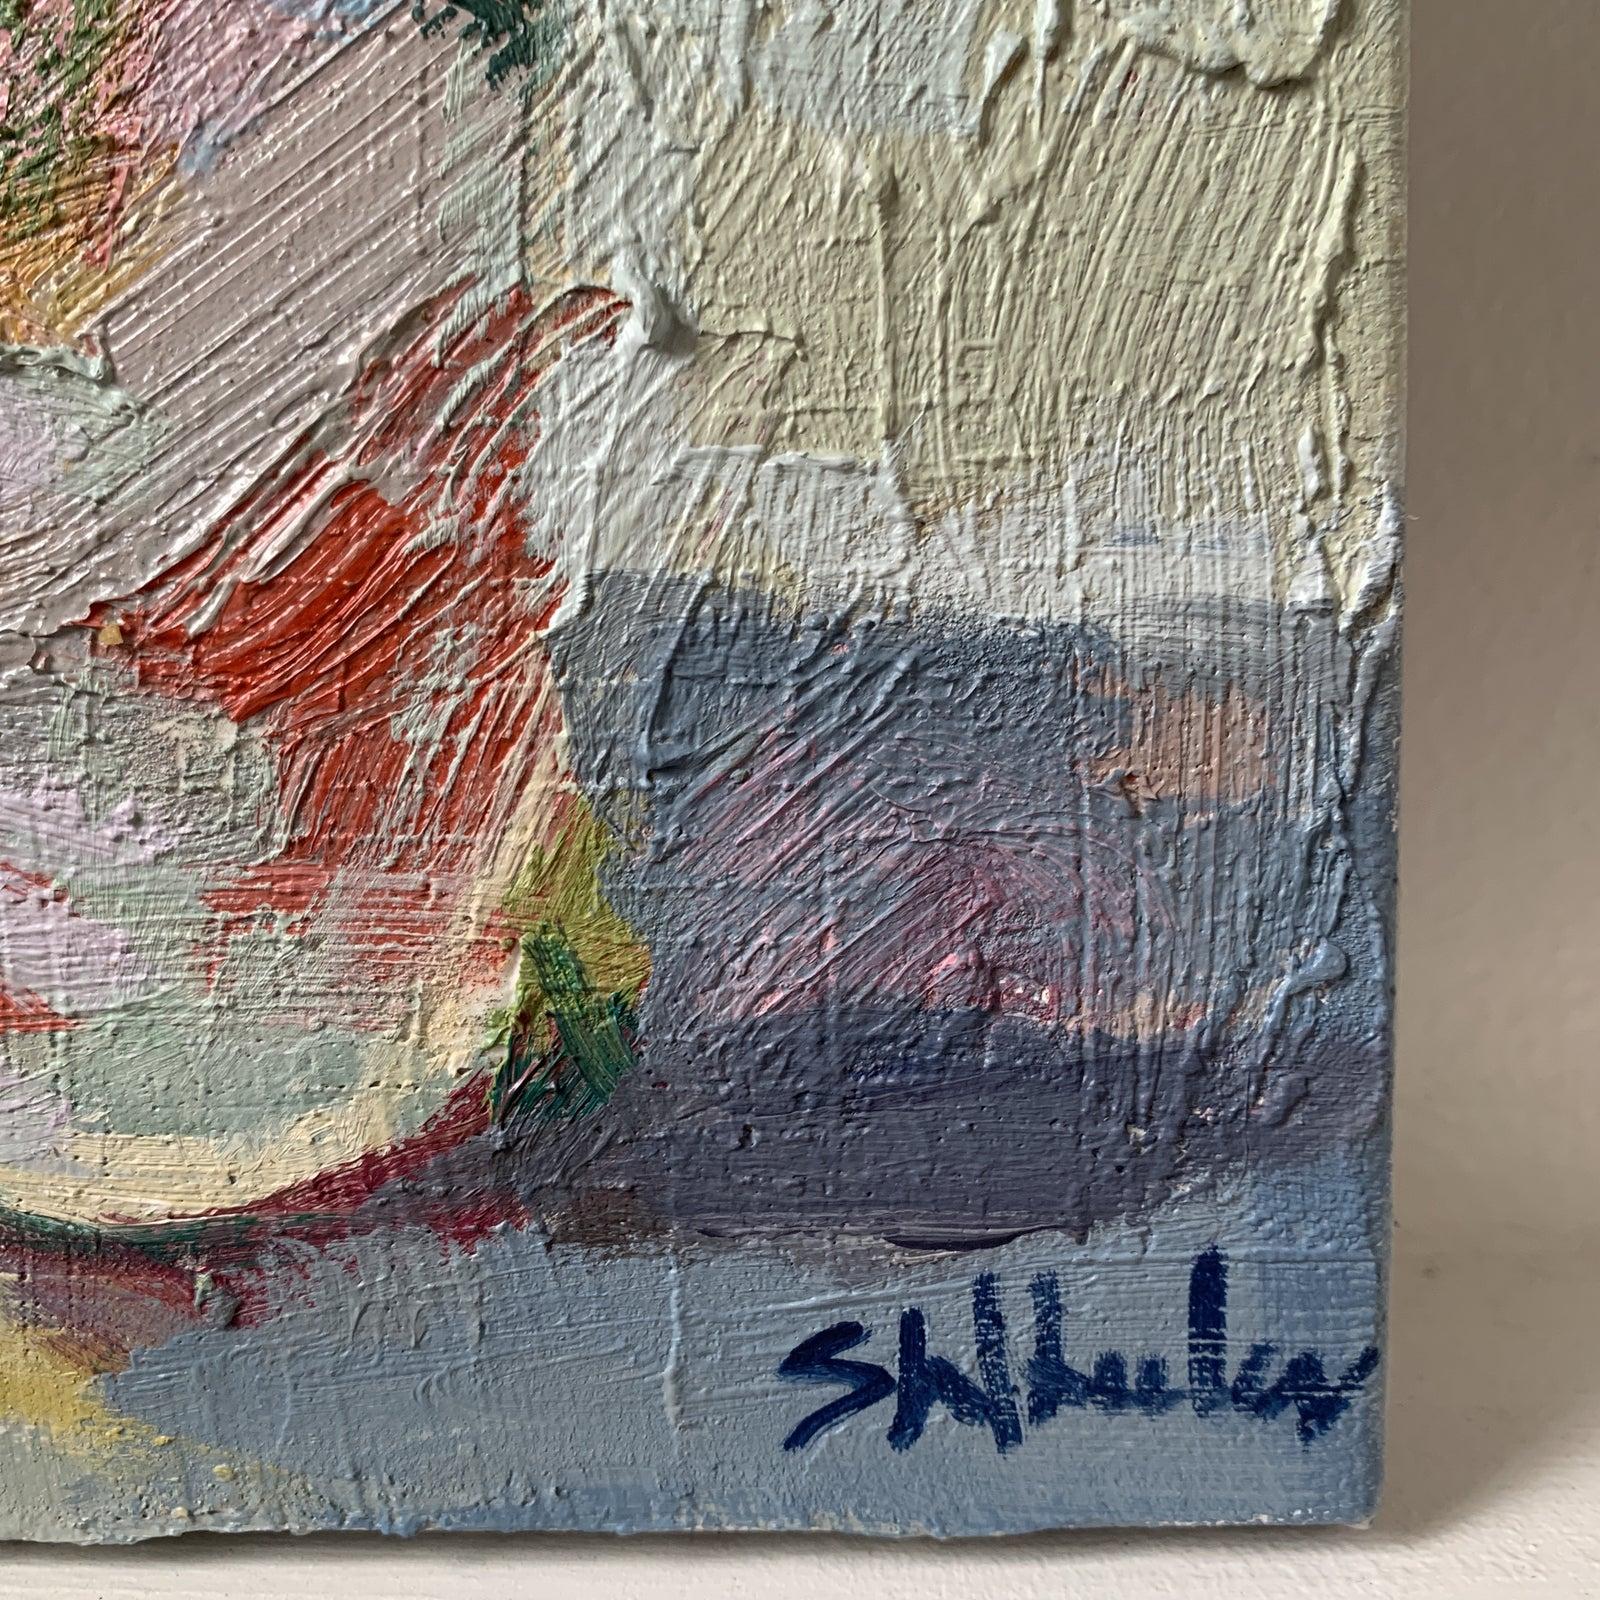 Stunning happy colors!! Gold Brass Easel also available for purchase. Mini oils by Stephanie Wheeler!

Somewhere between impressionism and abstraction, Stephanie Wheeler’s paintings take on a life of their own. She began her career in Atlanta as a